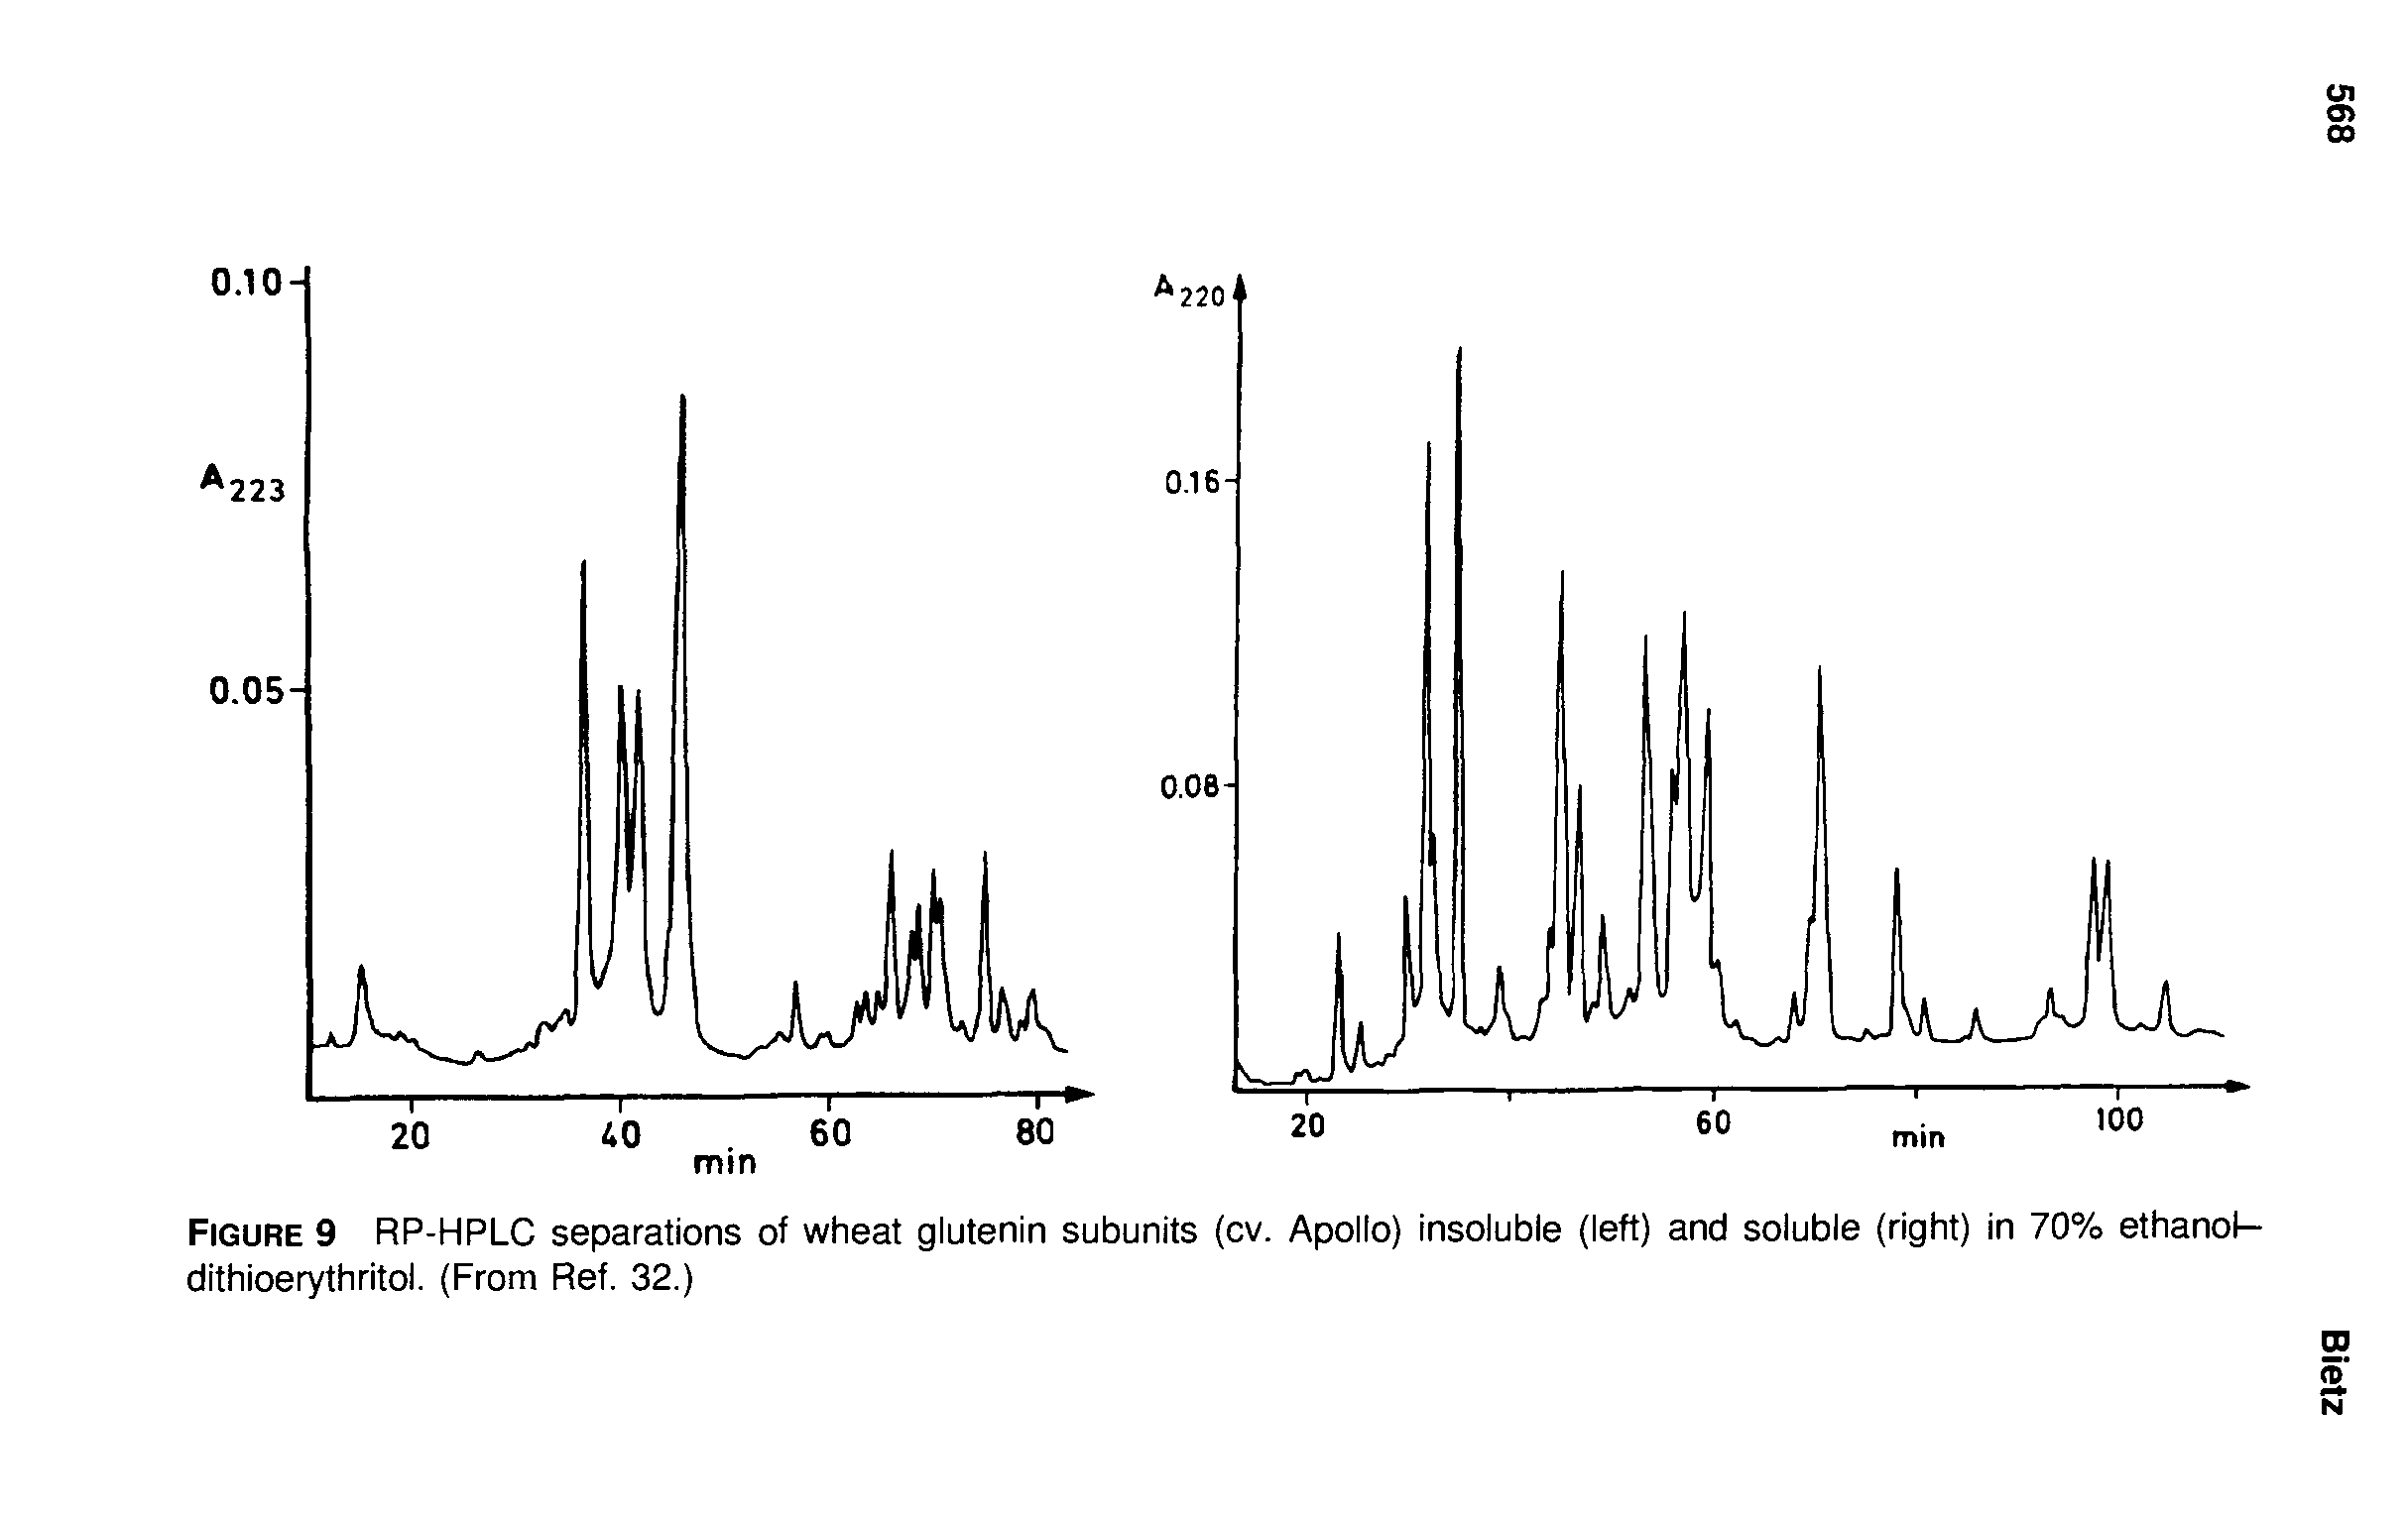 Figure 9 RP-HPLC separations of wheat glutenin subunits (cv. Apollo) insoluble (left) and soluble (right) in 70% ethanol— dithioerythritol. (From Ref. 32.)...